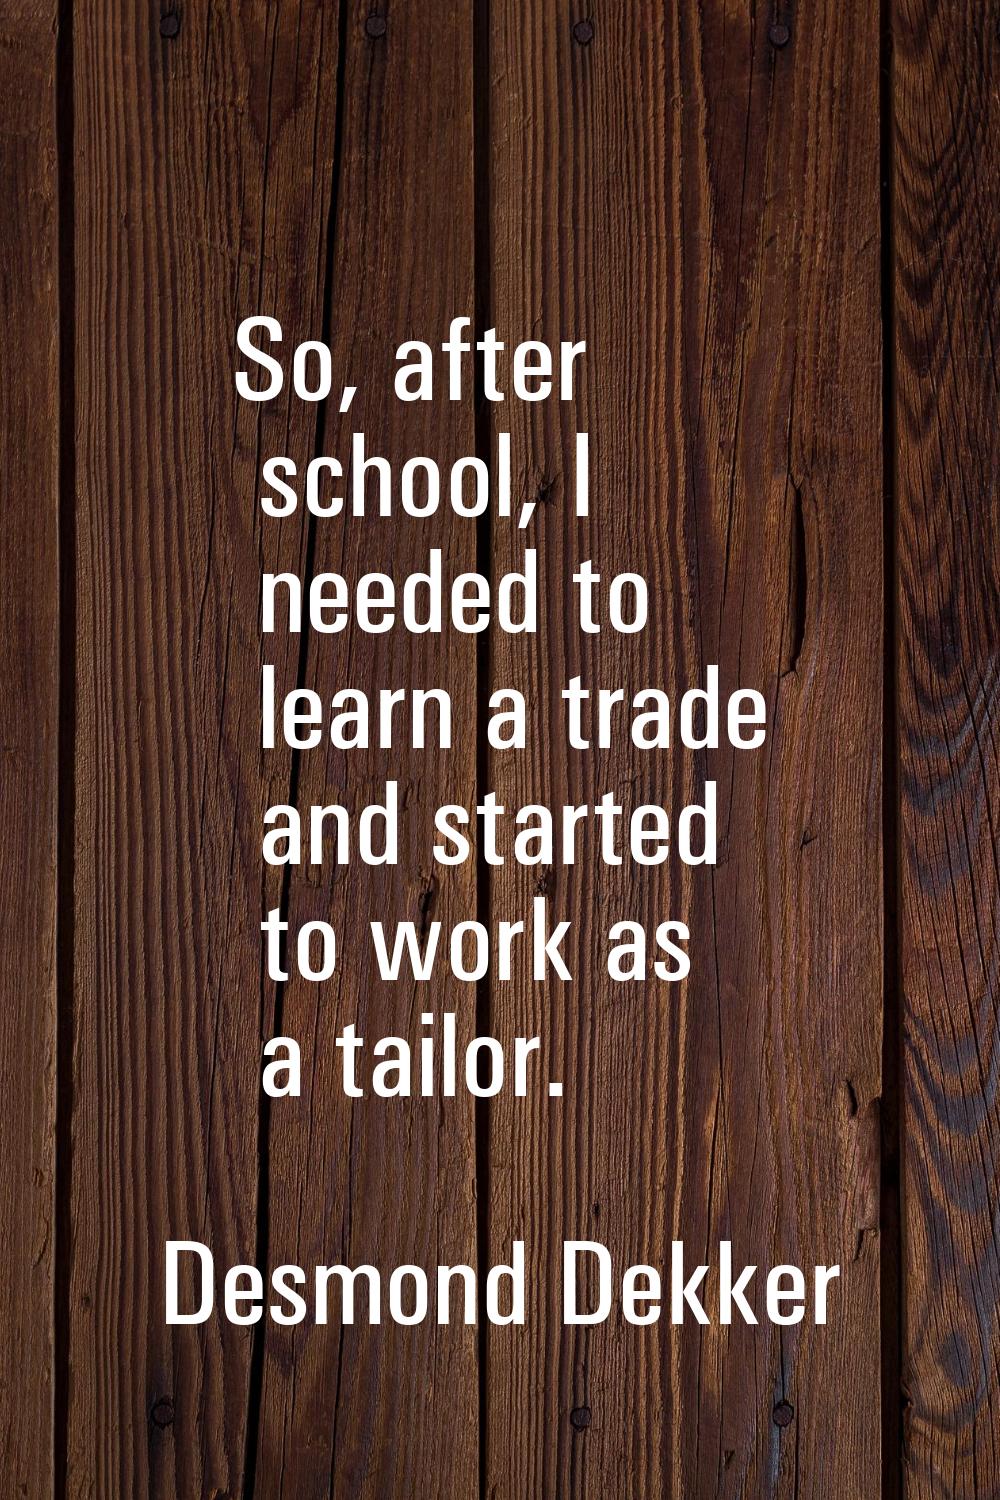 So, after school, I needed to learn a trade and started to work as a tailor.